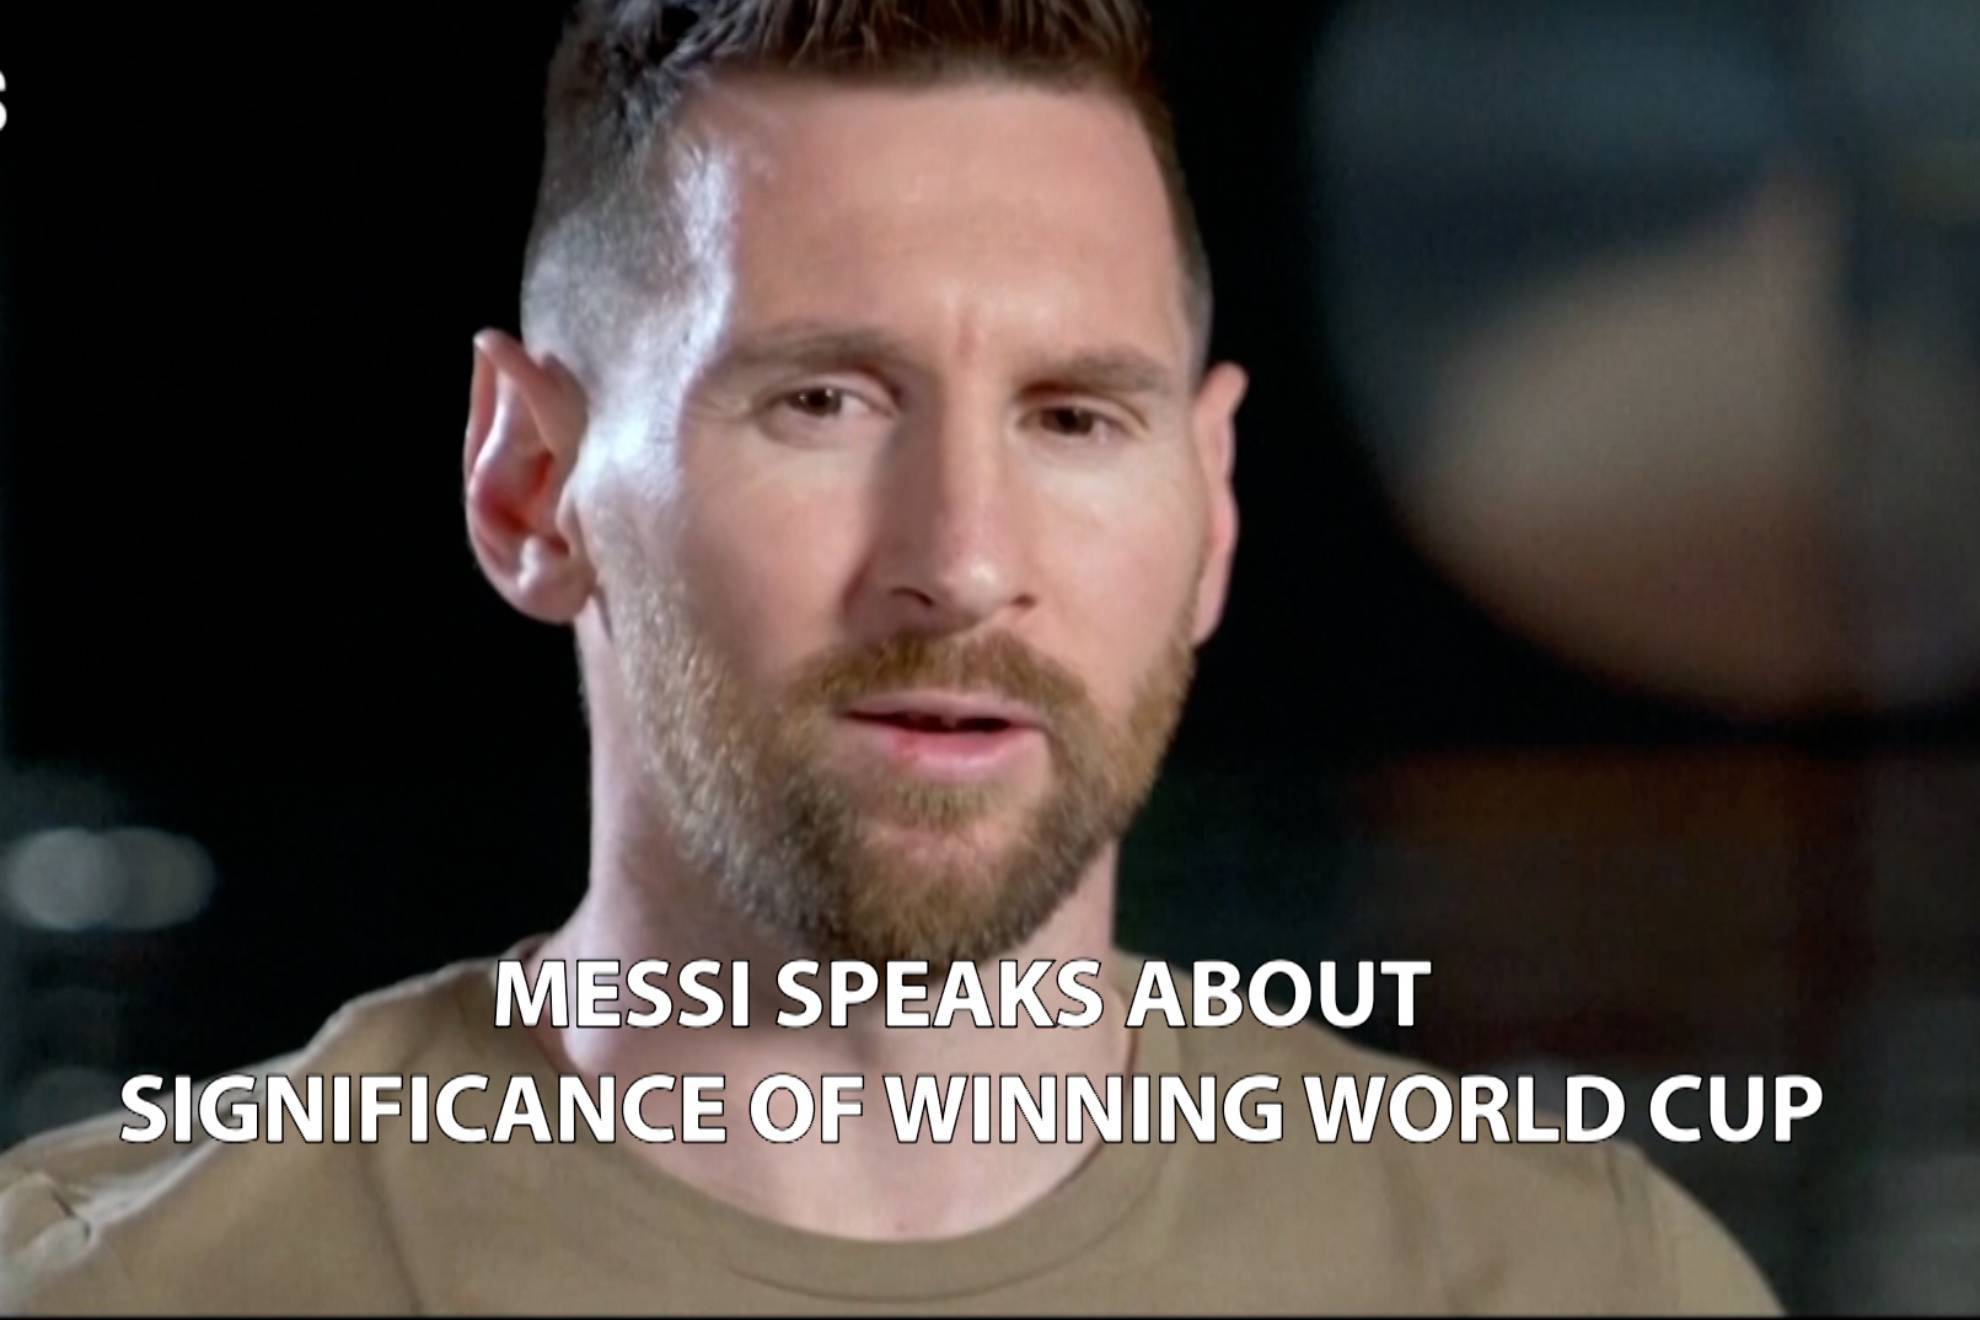 Lionel Messi Magic For Some Brands During World Cup, Market Value Rises 42  Billion Pounds: Report